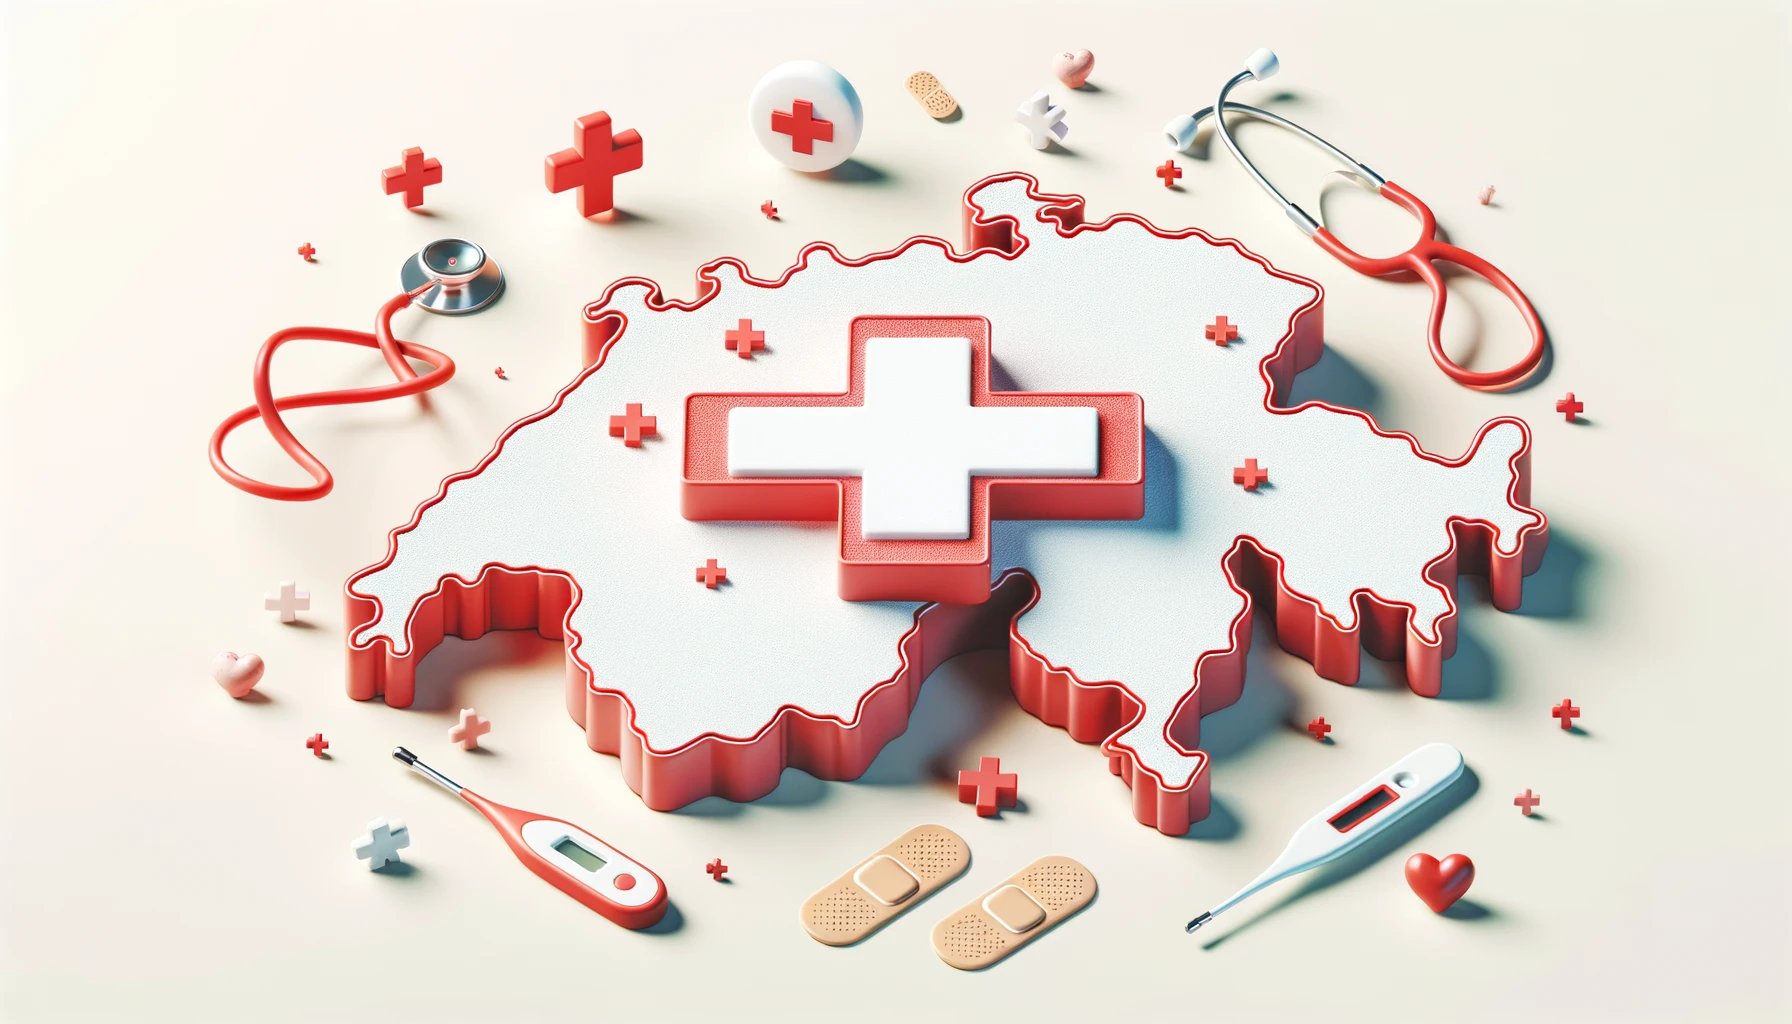 Fun illustration of Switzerland's map in soft white with red borders. A large red cross stands at the center. Whimsical healthtech icons, such as a stethoscope, thermometer, and band-aid, are scattered playfully around, giving a friendly healthcare vibe.